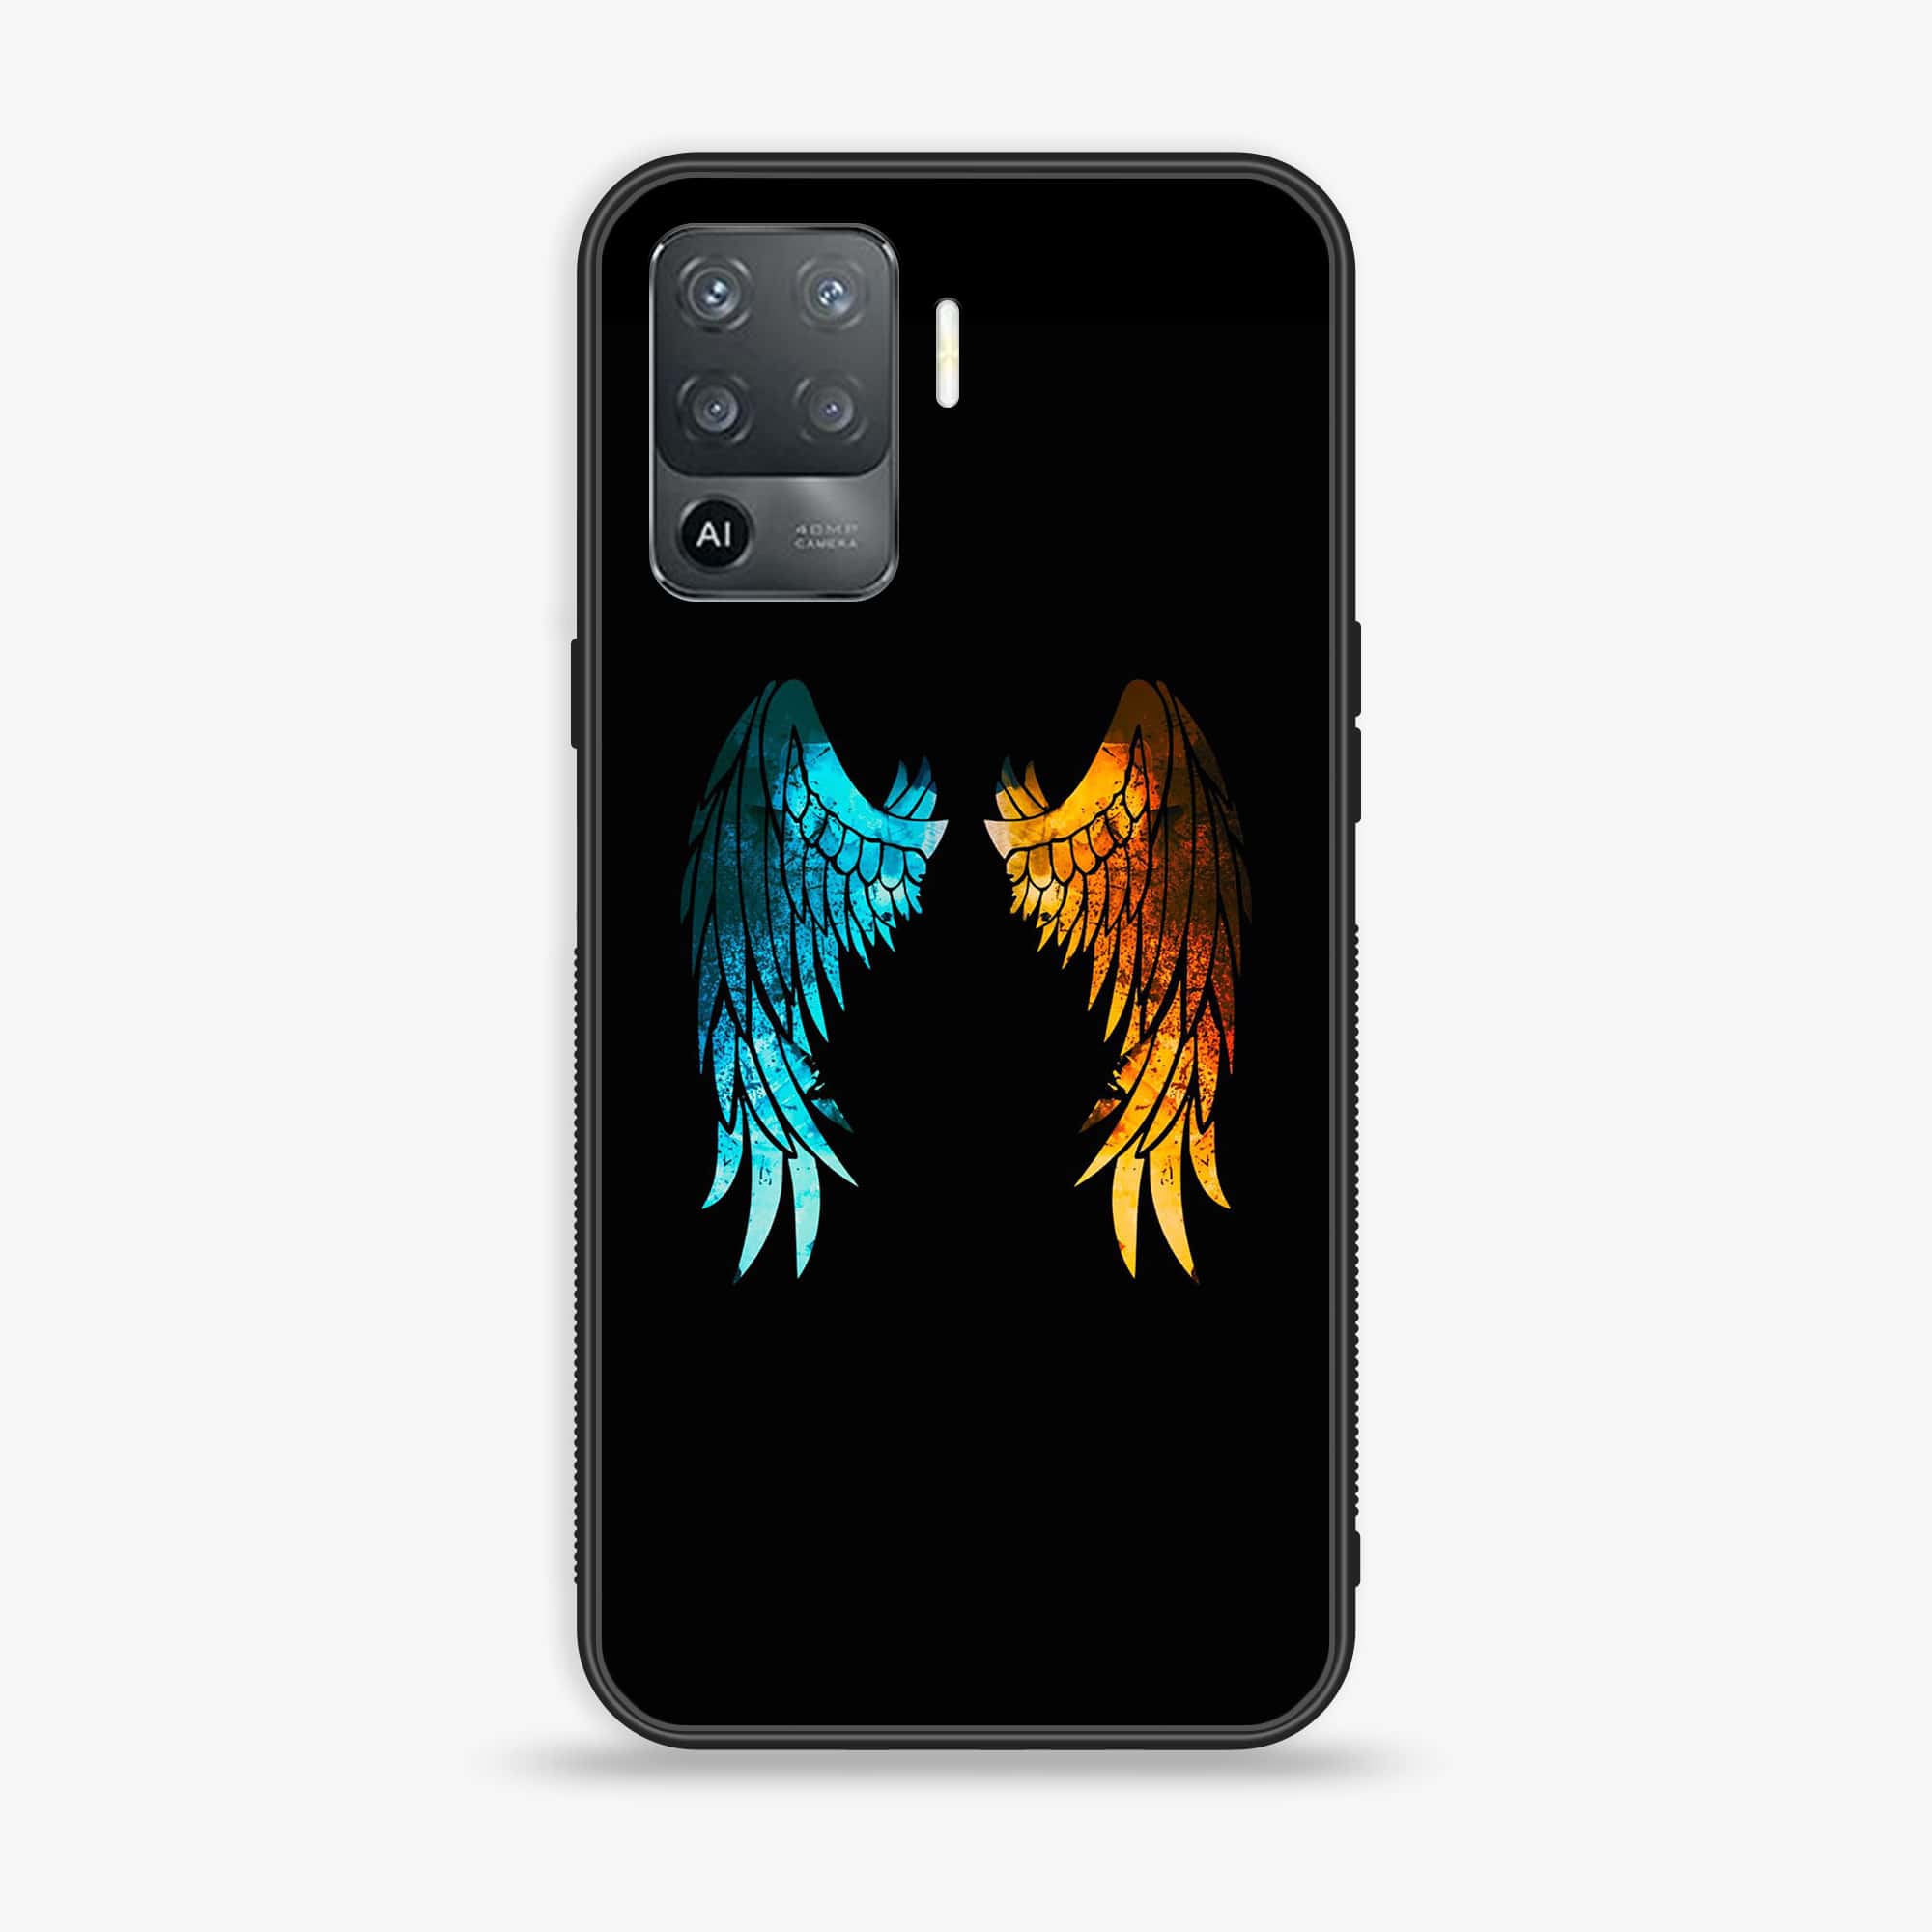 Oppo F19 Pro -Angel Wings 2.0 Series - Premium Printed Glass soft Bumper shock Proof Case